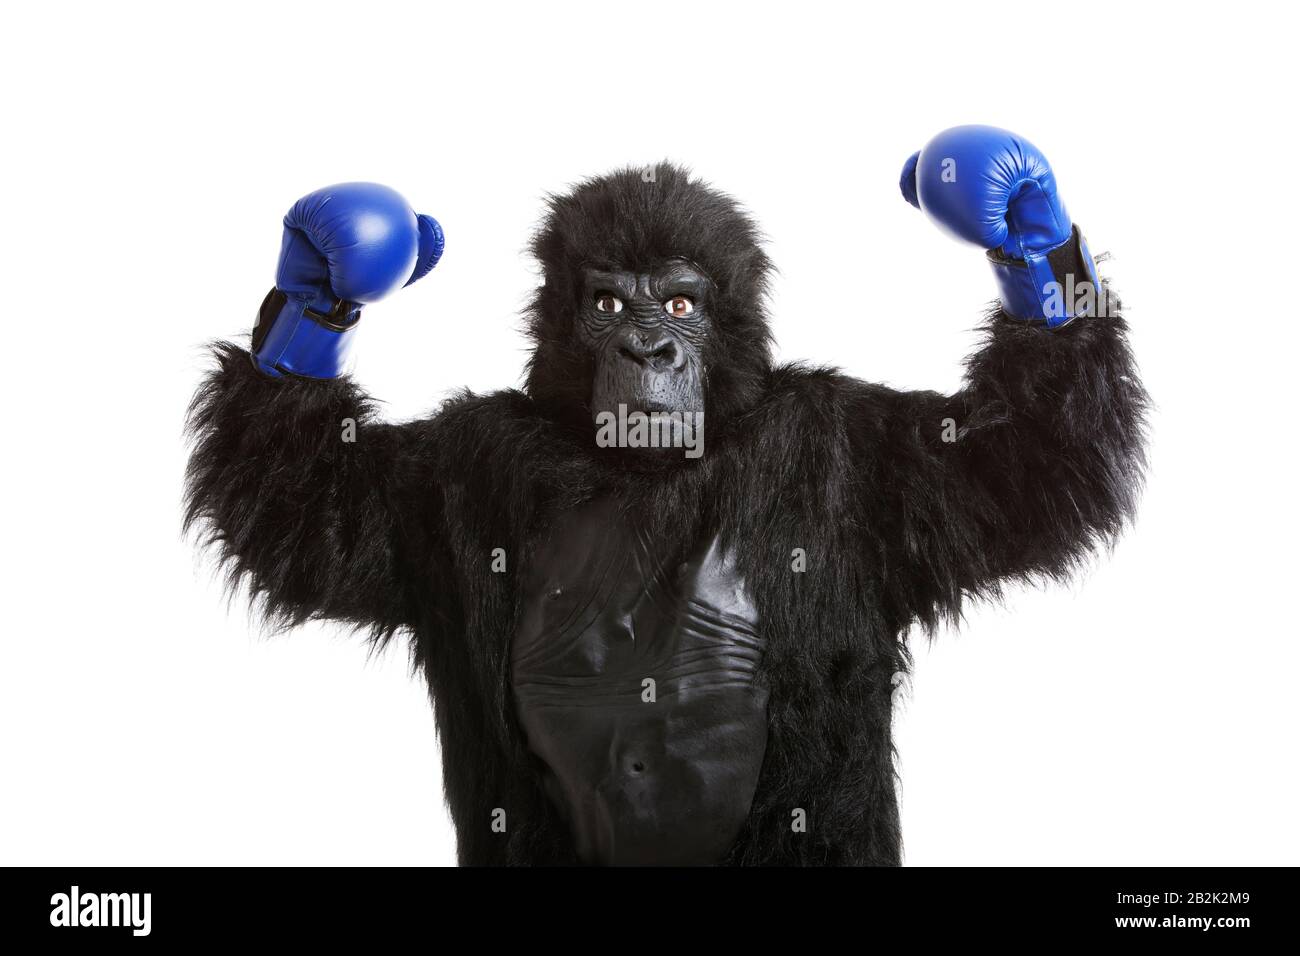 Young man in gorilla costume wearing boxing gloves against white background Stock Photo